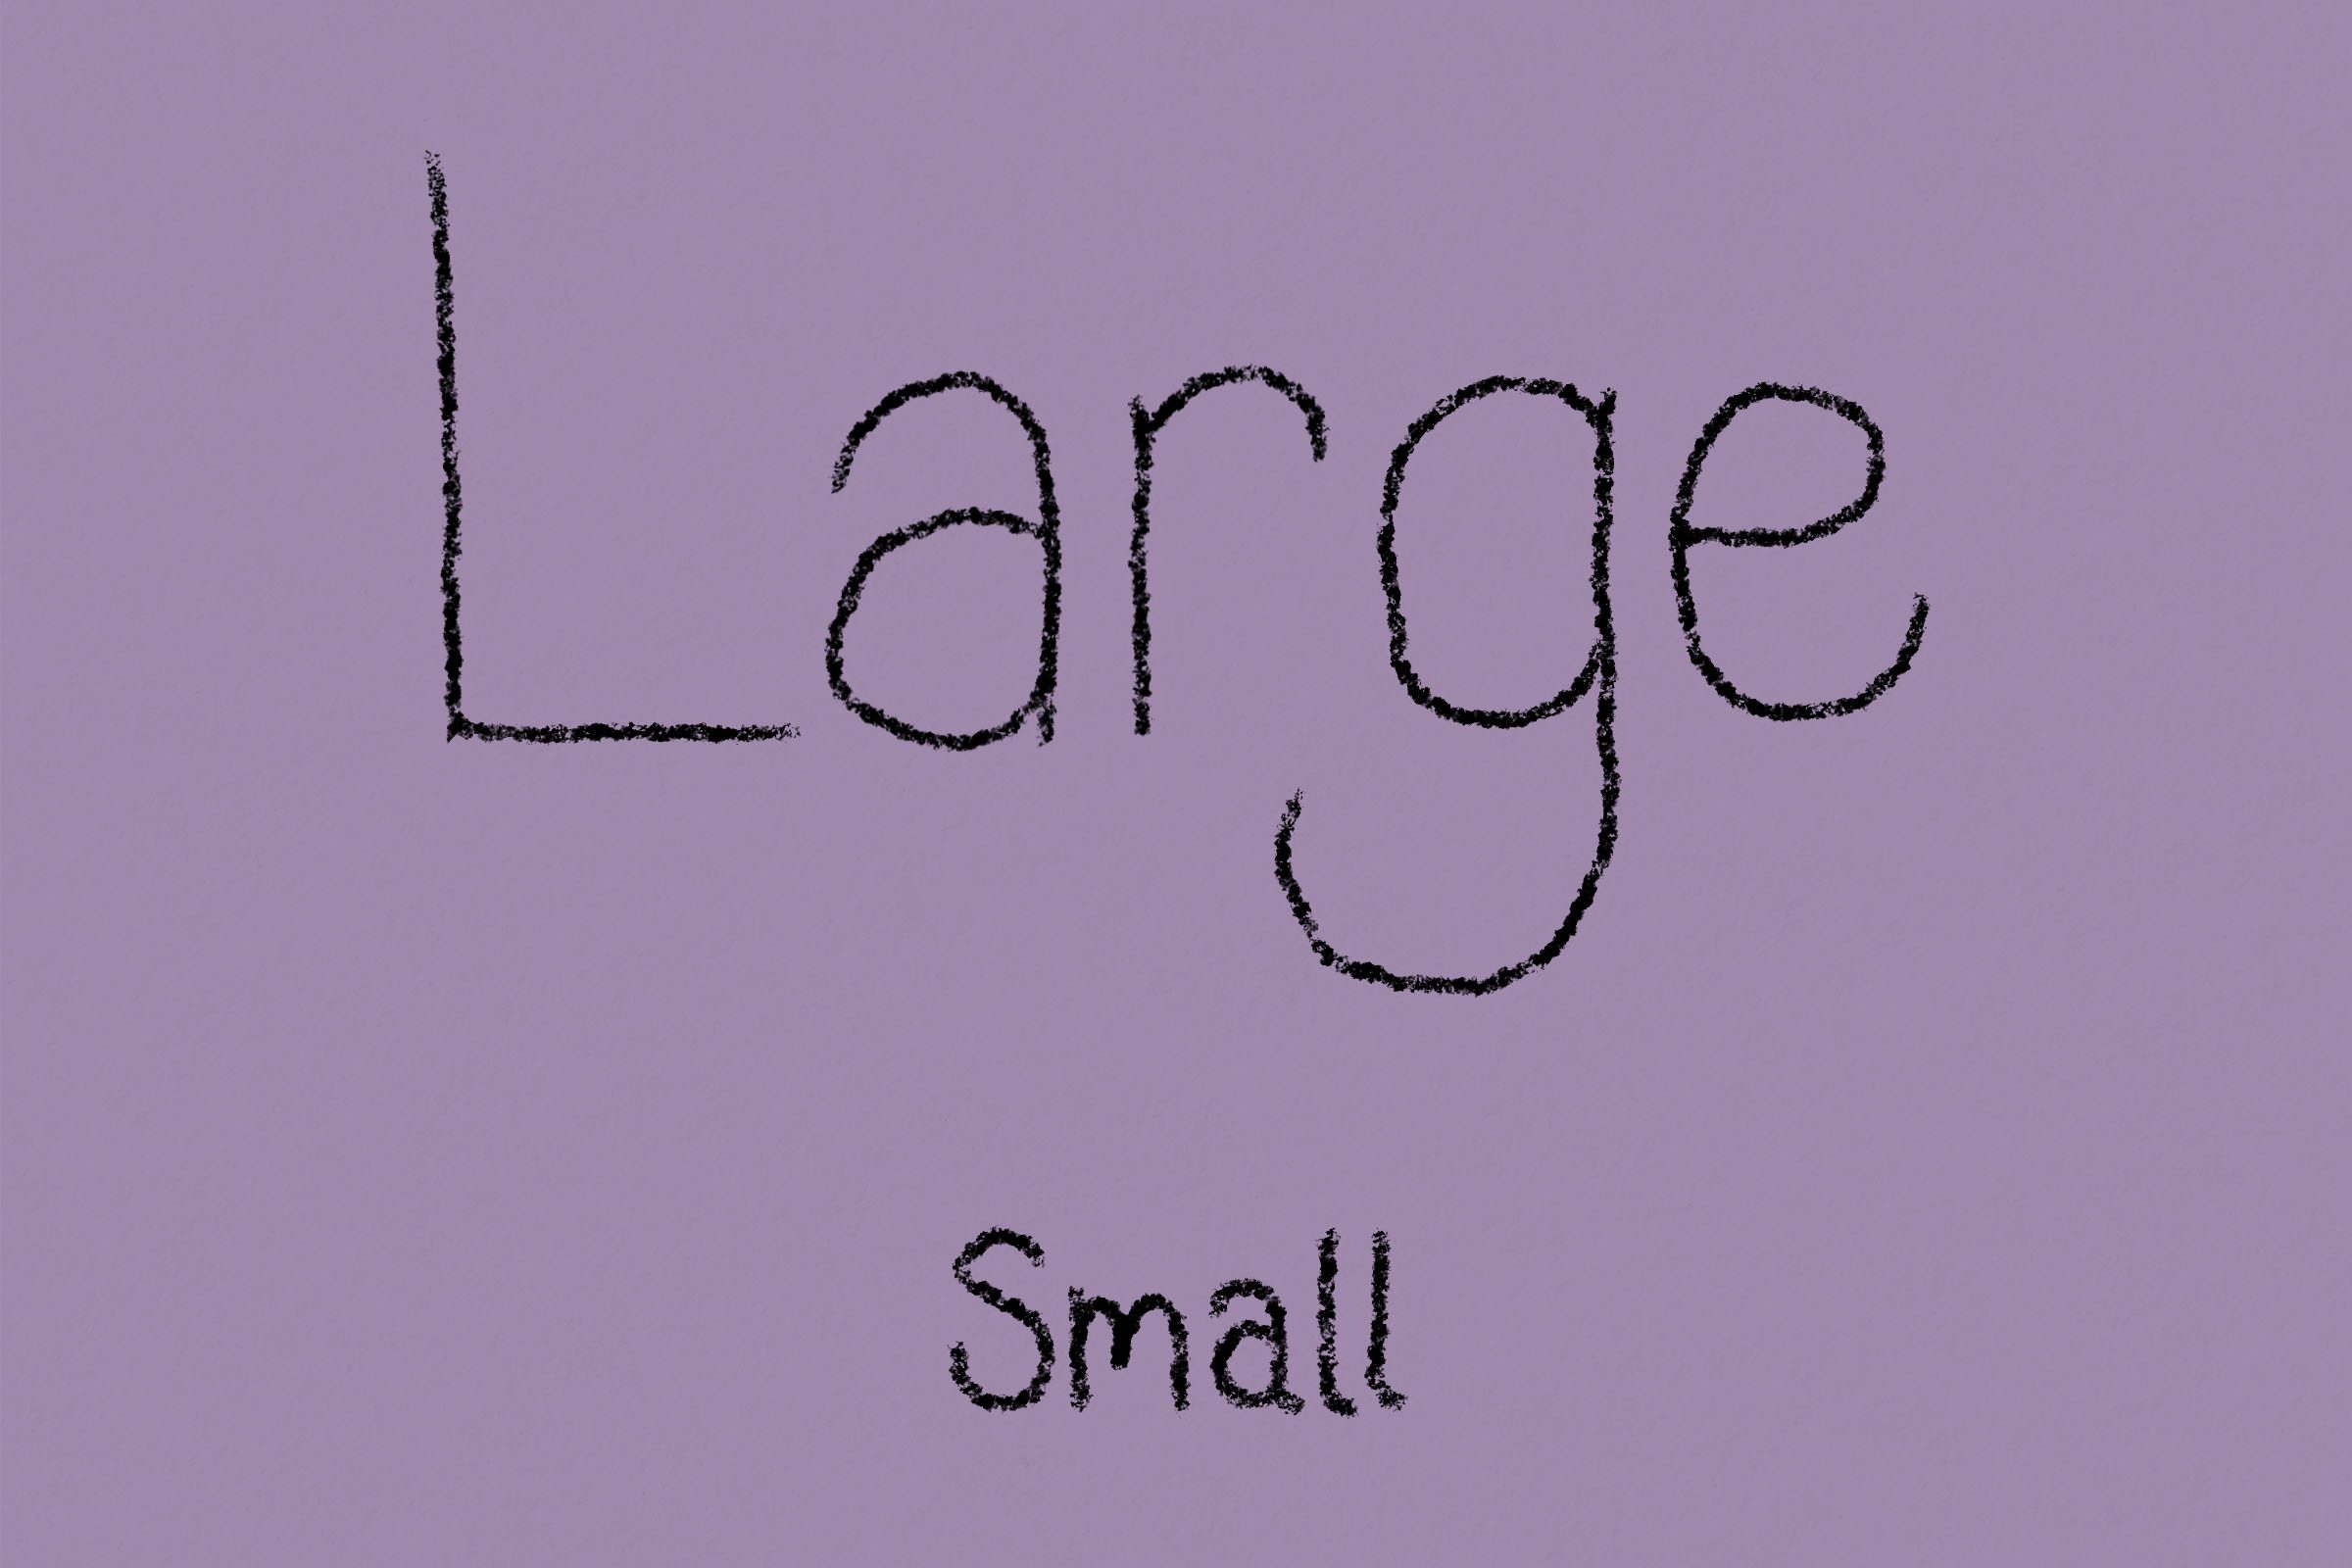 Handwriting showing large vs small letters